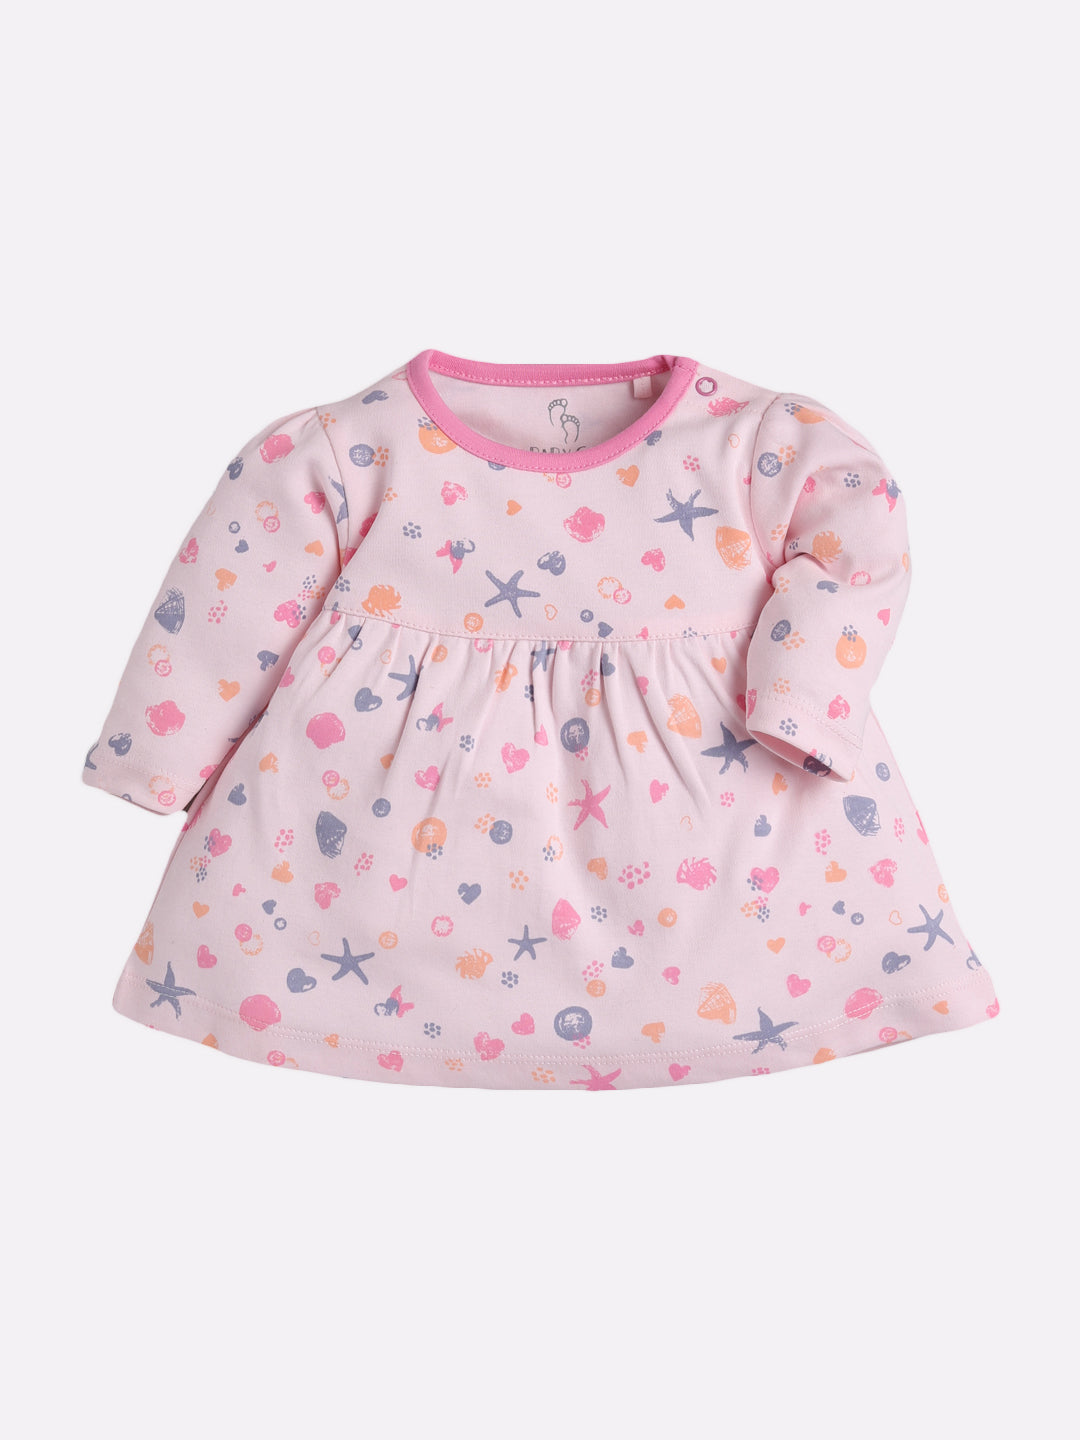 Mid/knee length baby girl frock for casual wear-PINK